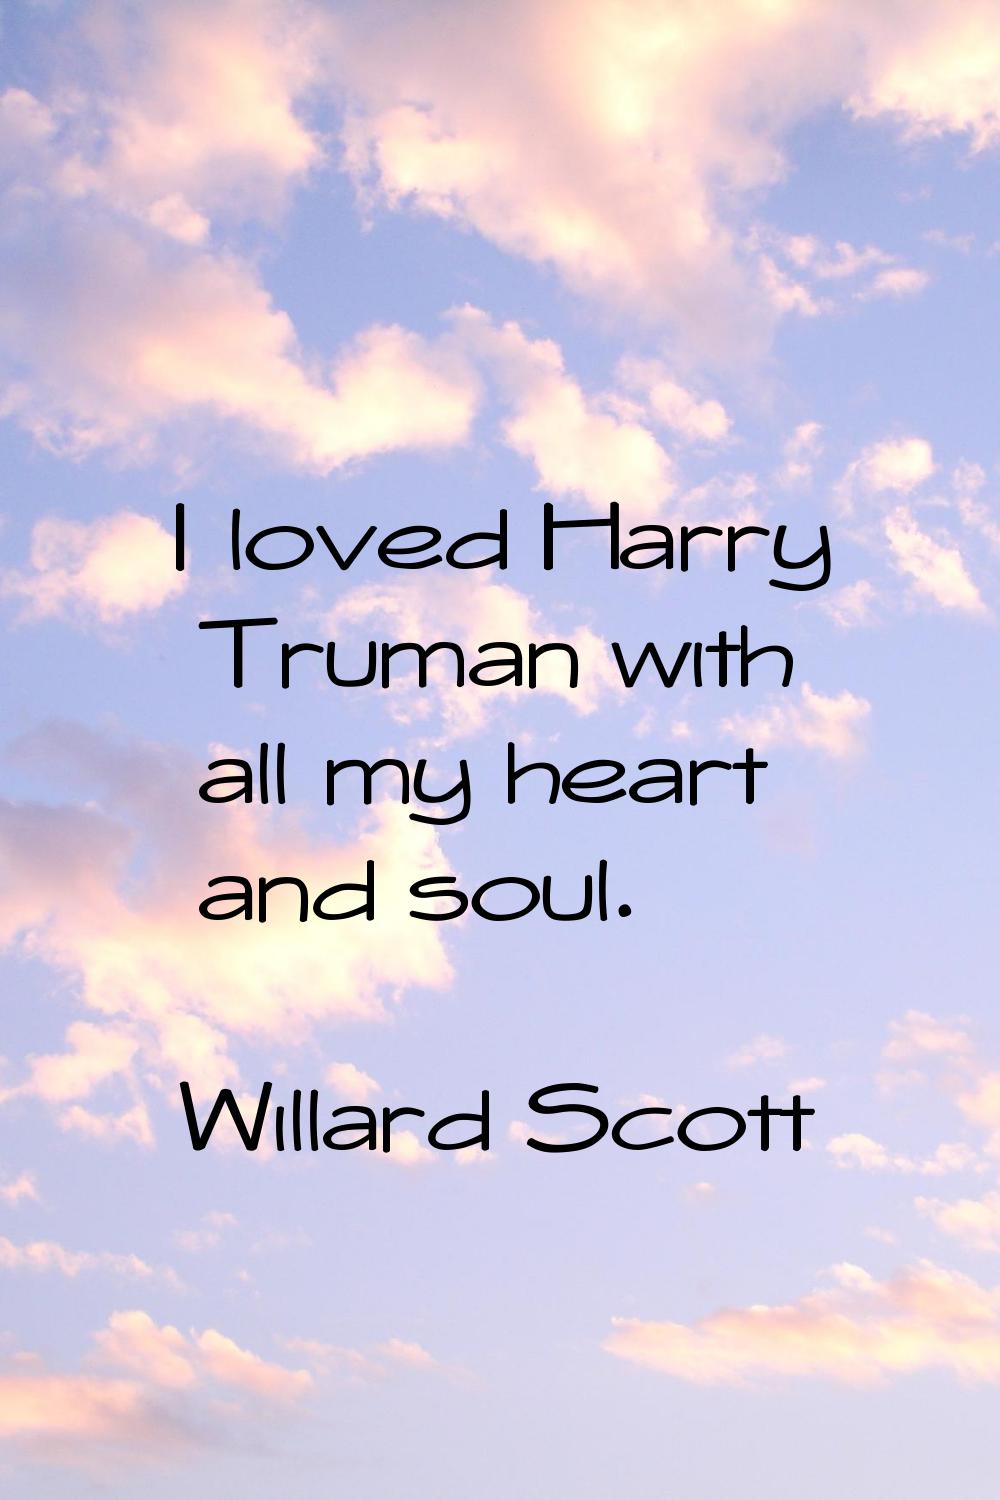 I loved Harry Truman with all my heart and soul.